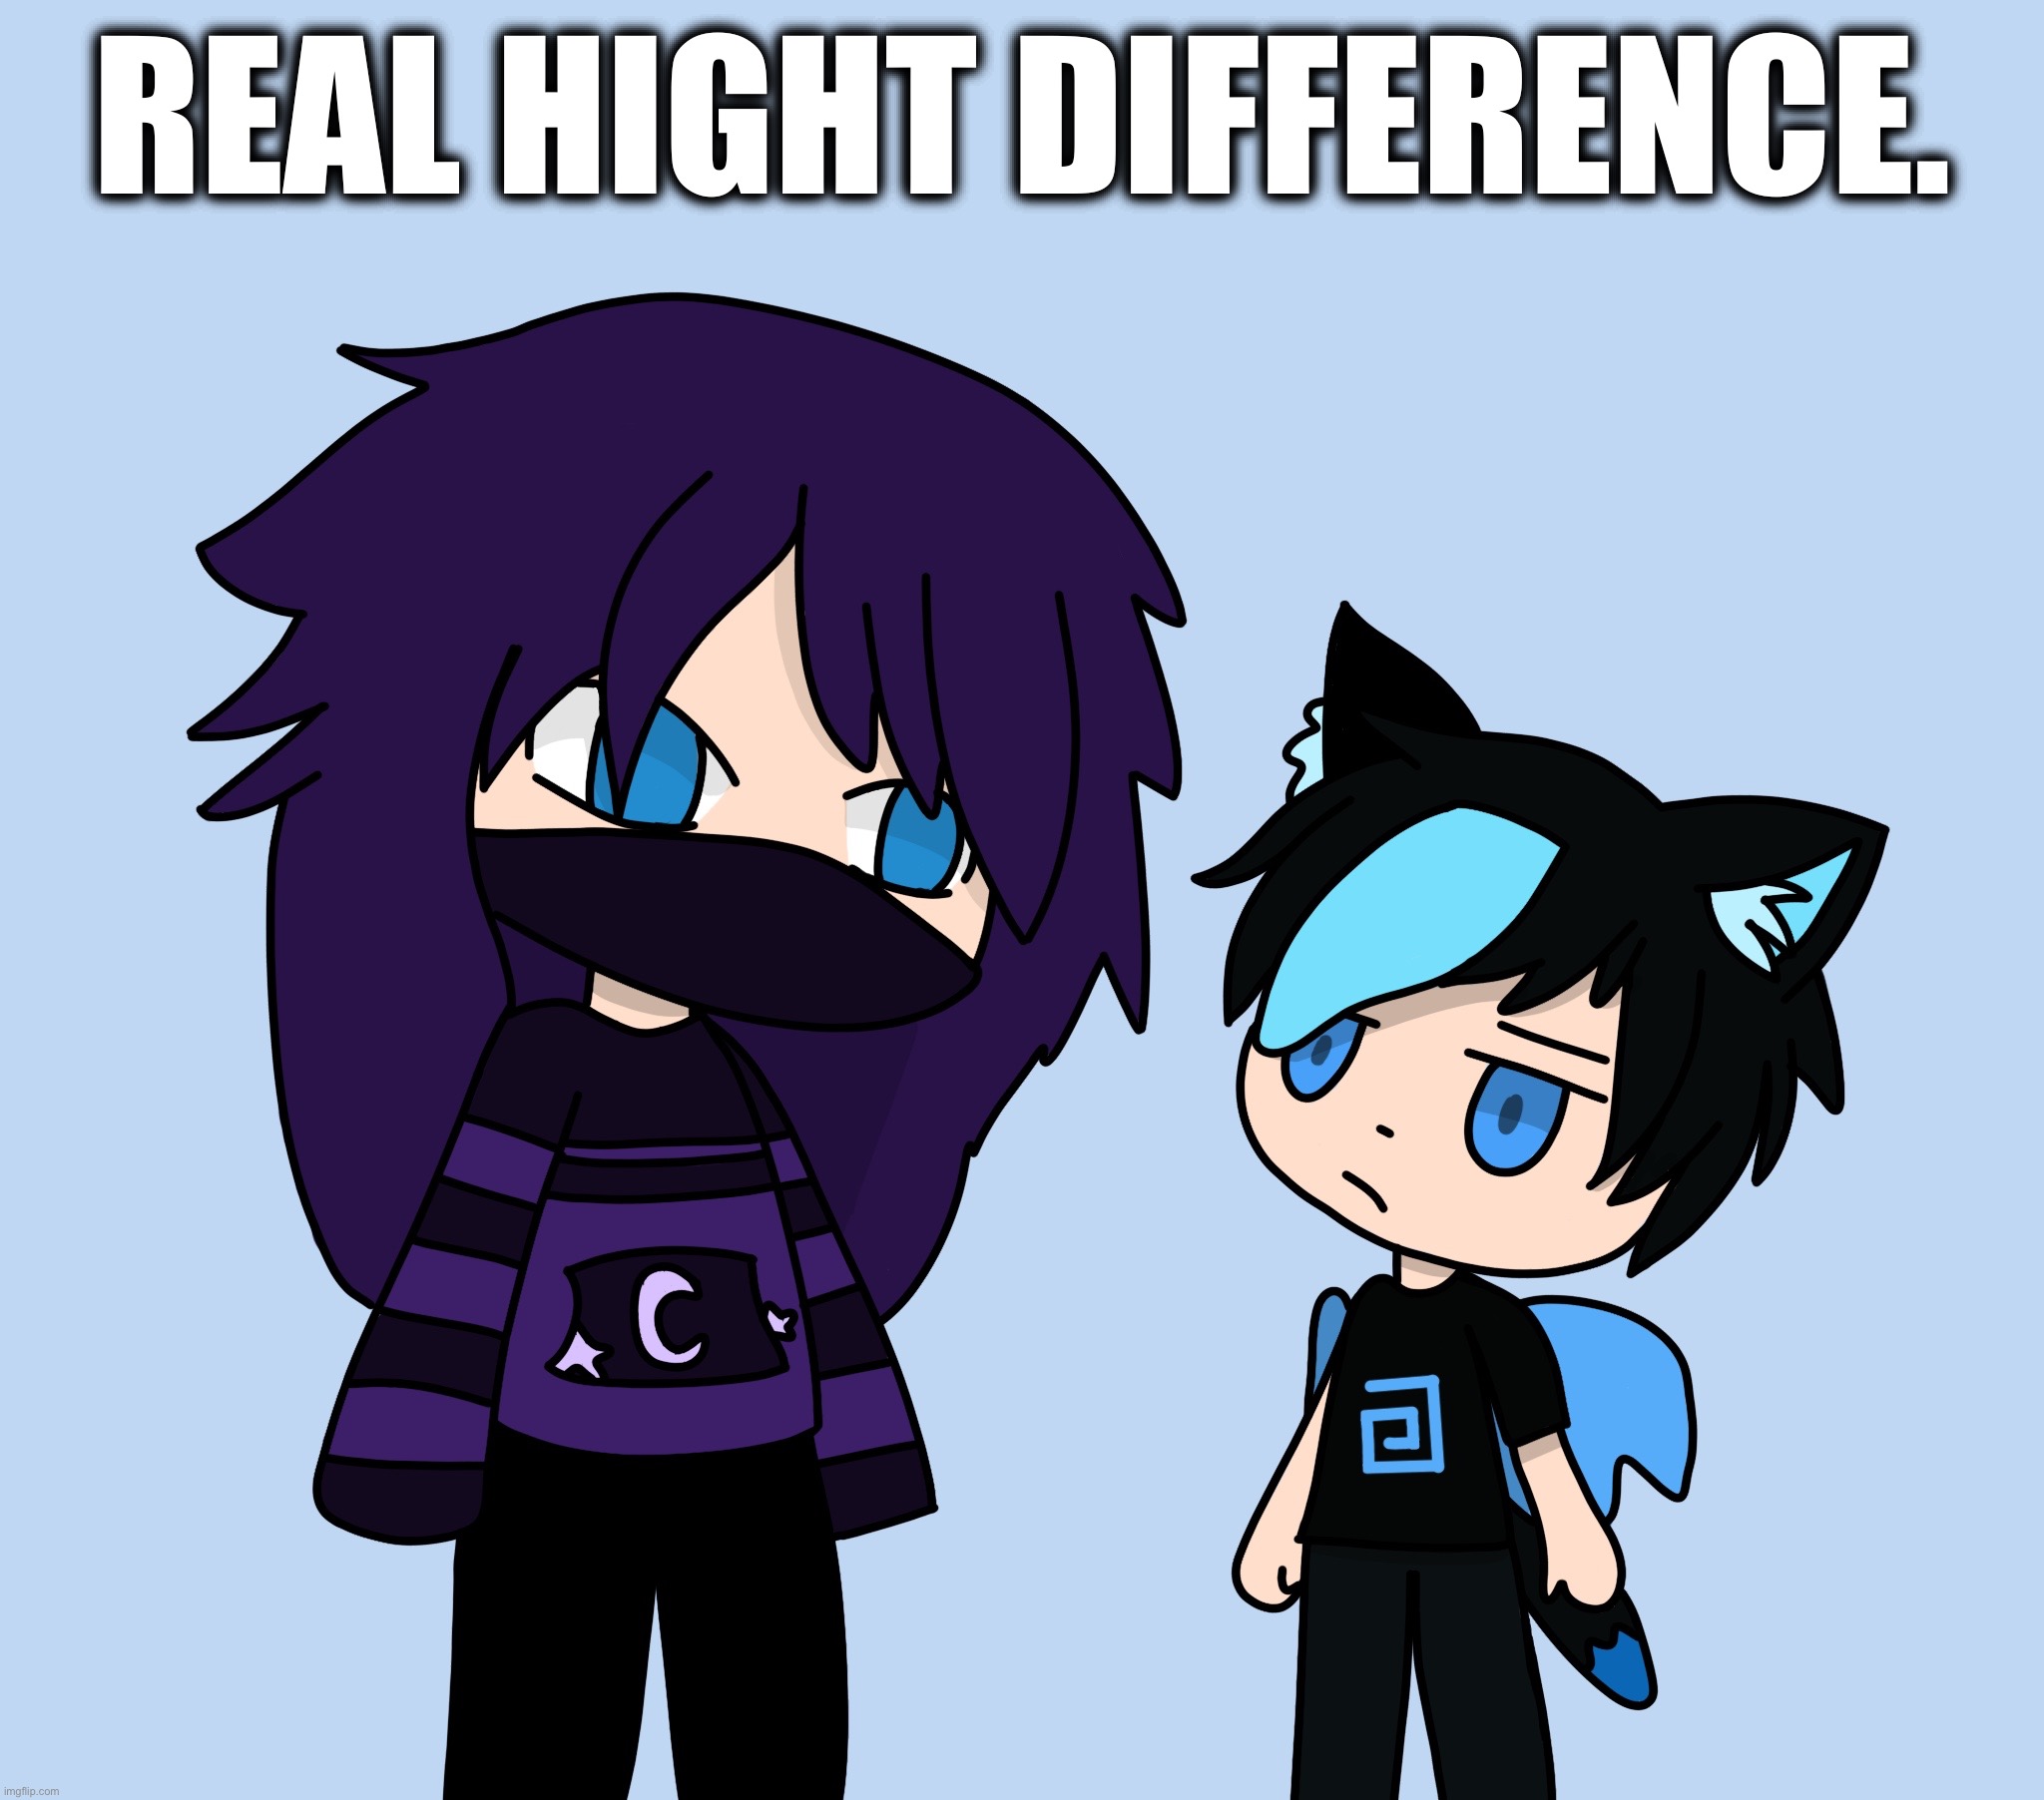 Me and Icy’s hight | REAL HIGHT DIFFERENCE. | made w/ Imgflip meme maker